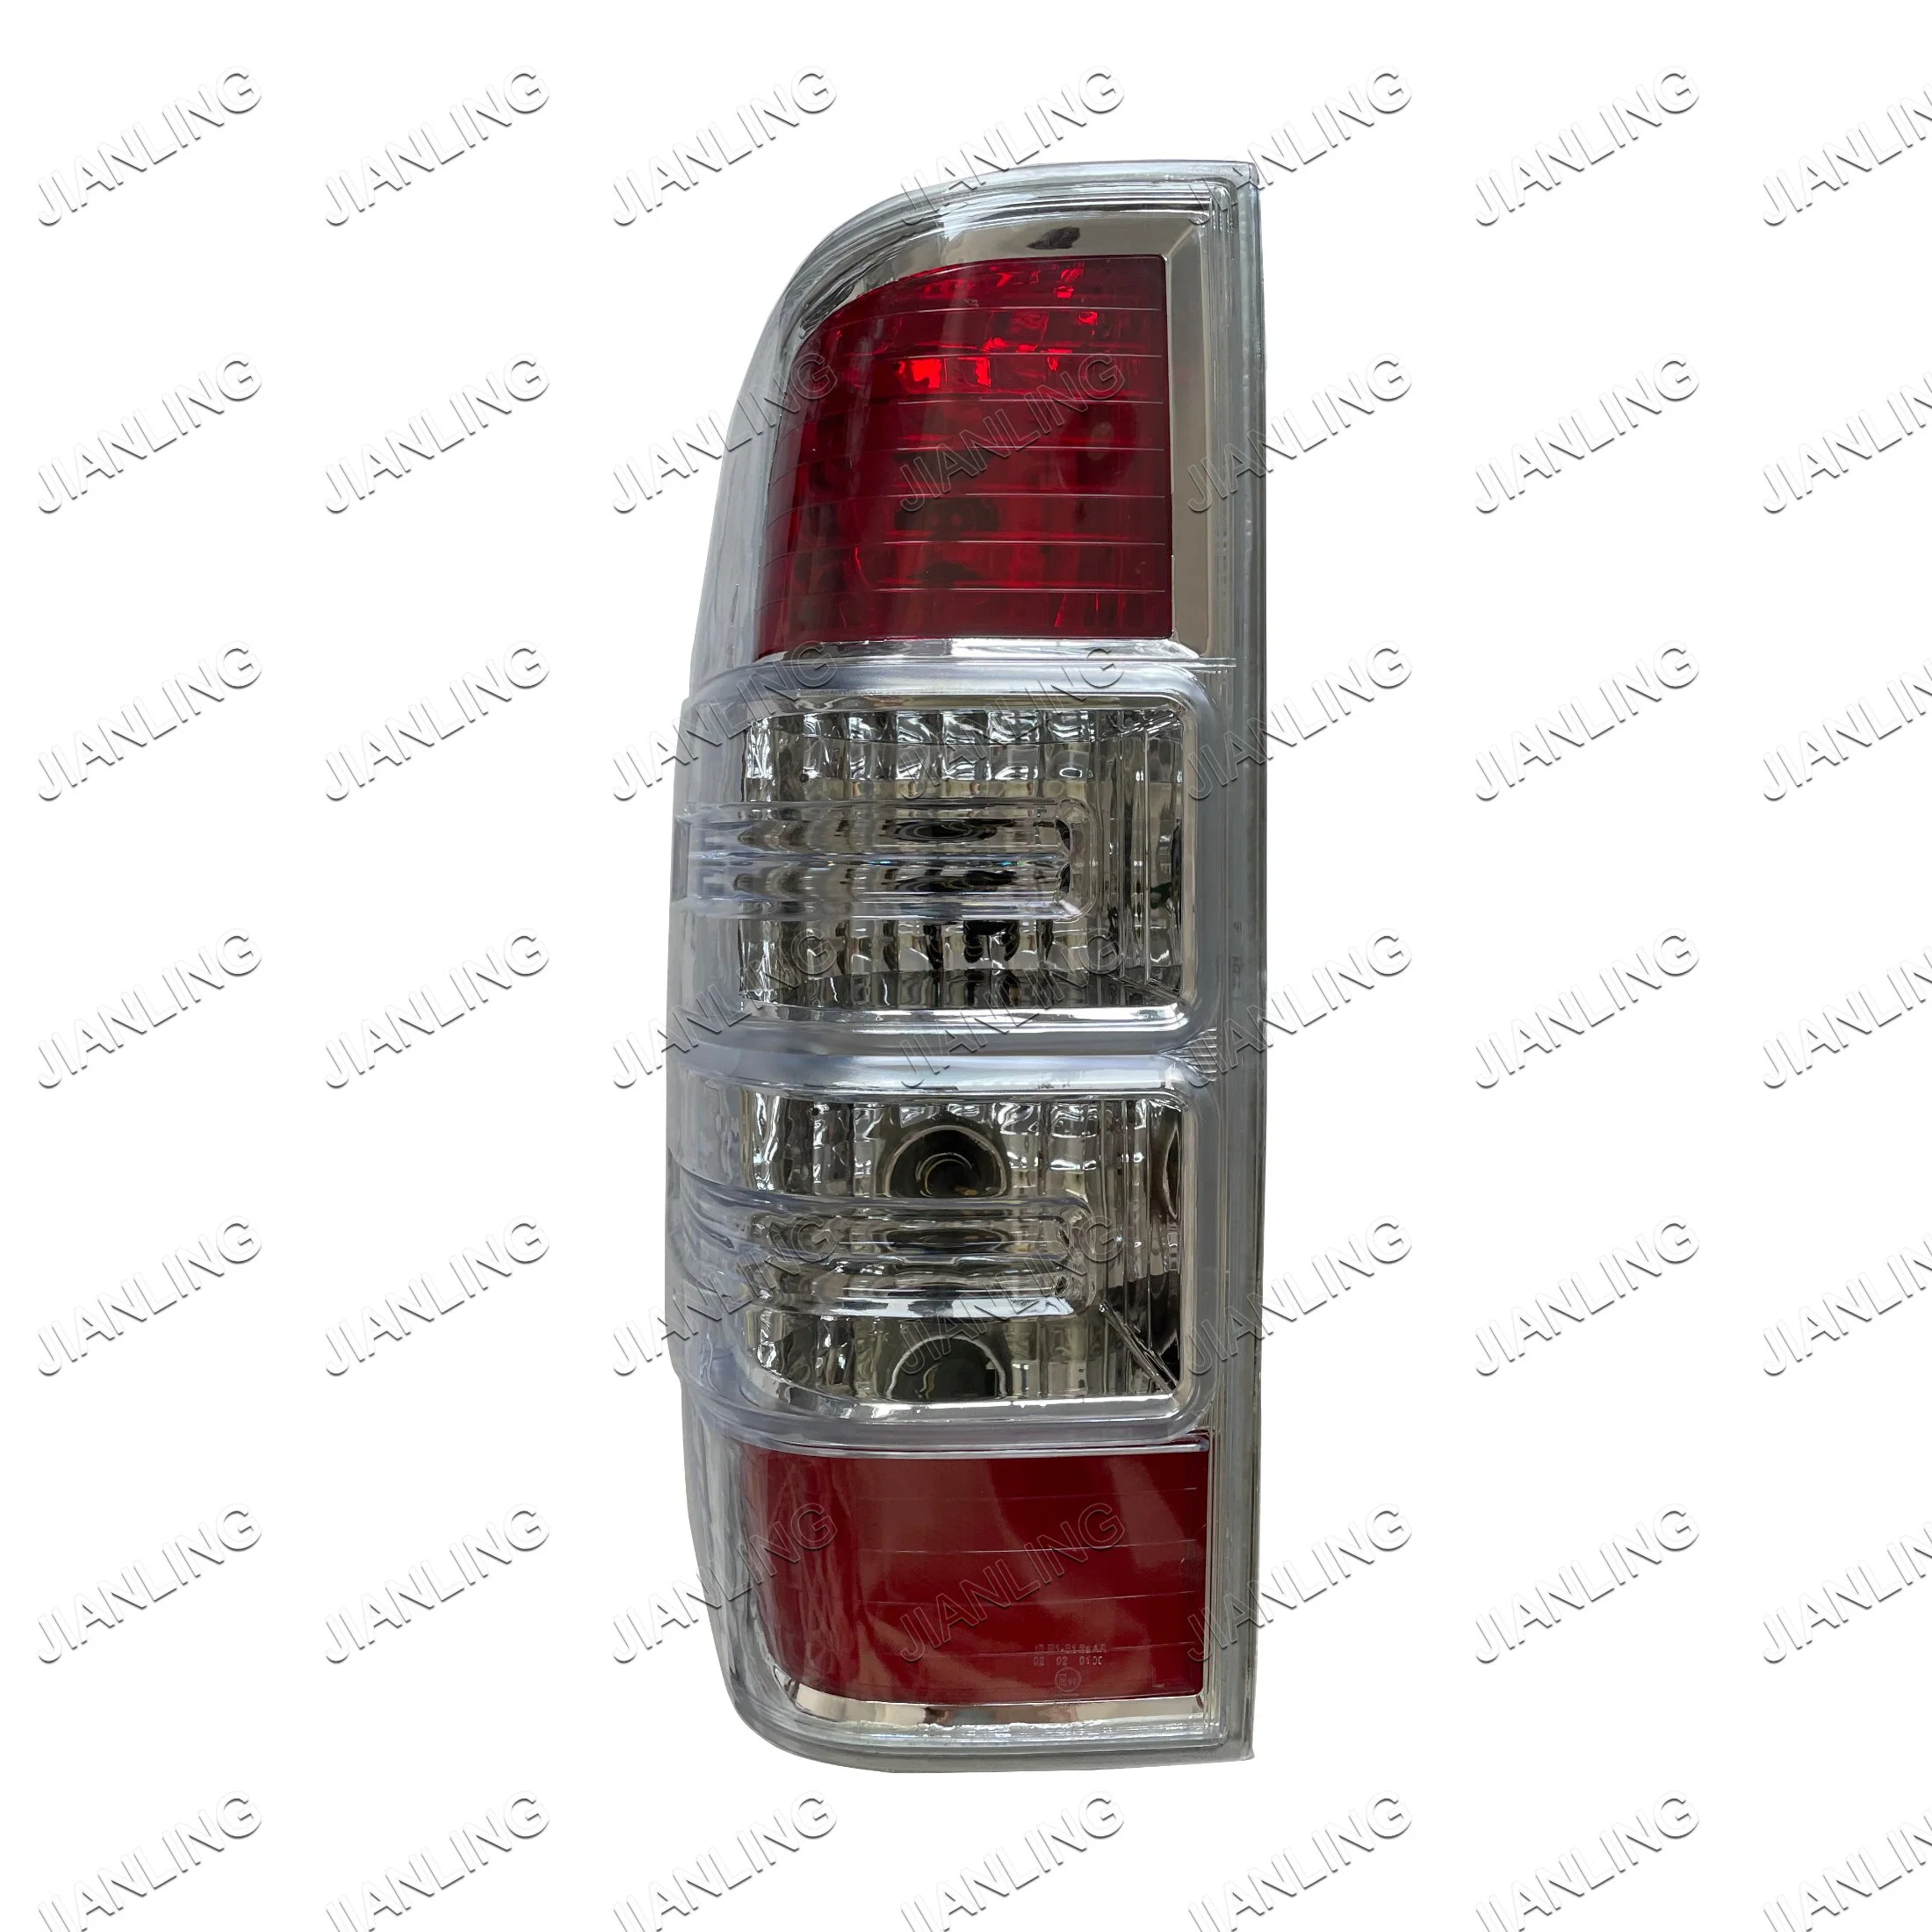 Auto Pick-up Tail Lamp for Ford Ranger2008 231-1955-Ae Halogen Lamp